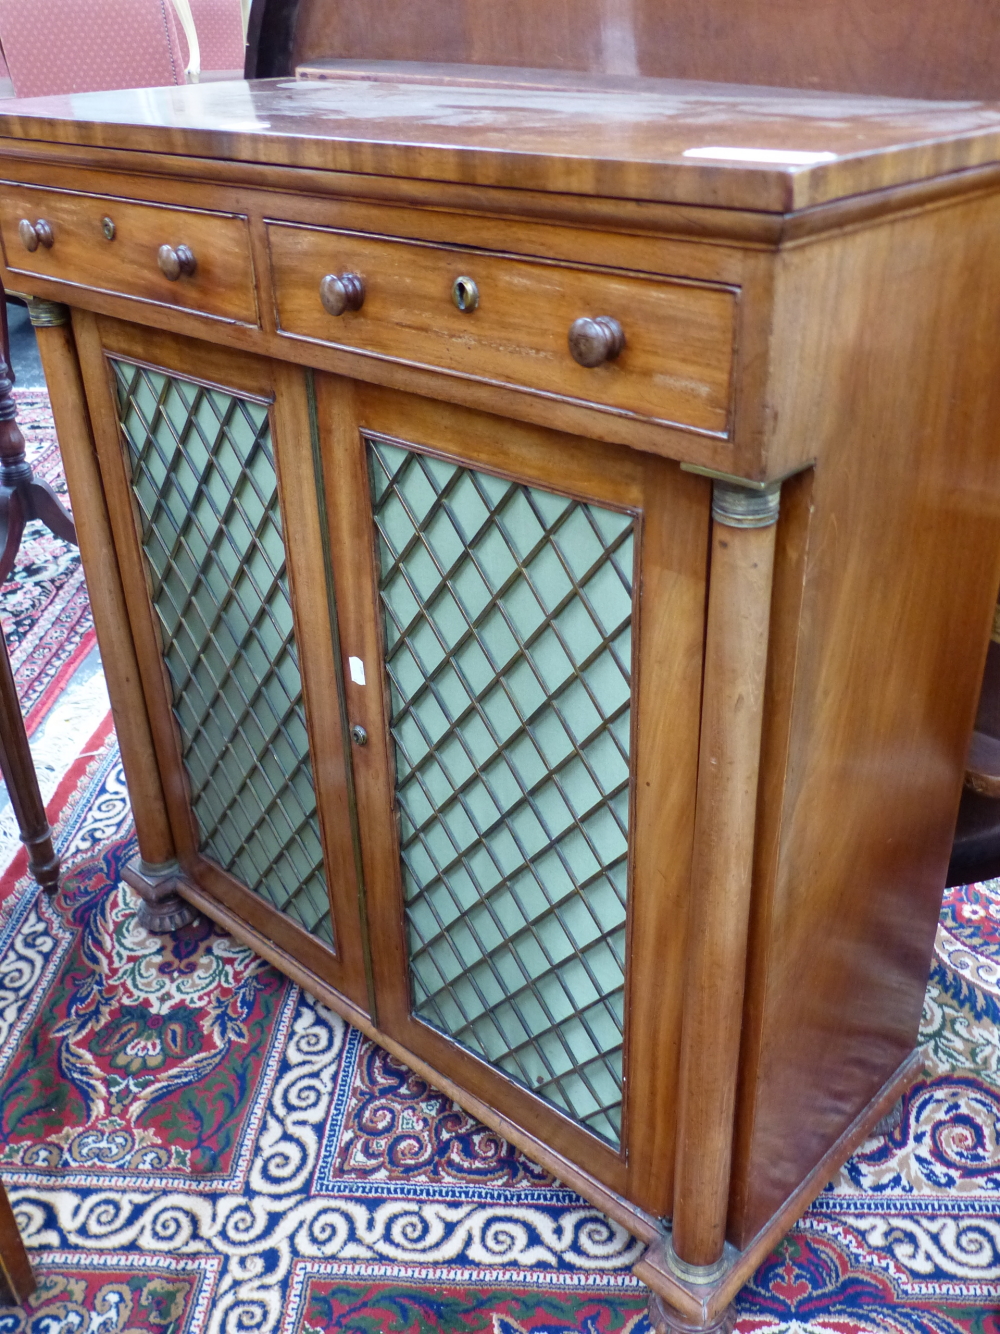 A REGENCY MAHOGANY SIDE CABINET WITH TWO DRAWERS ABOVE THE GRILLE FRONTED DOORS BETWEEN GUN BARREL